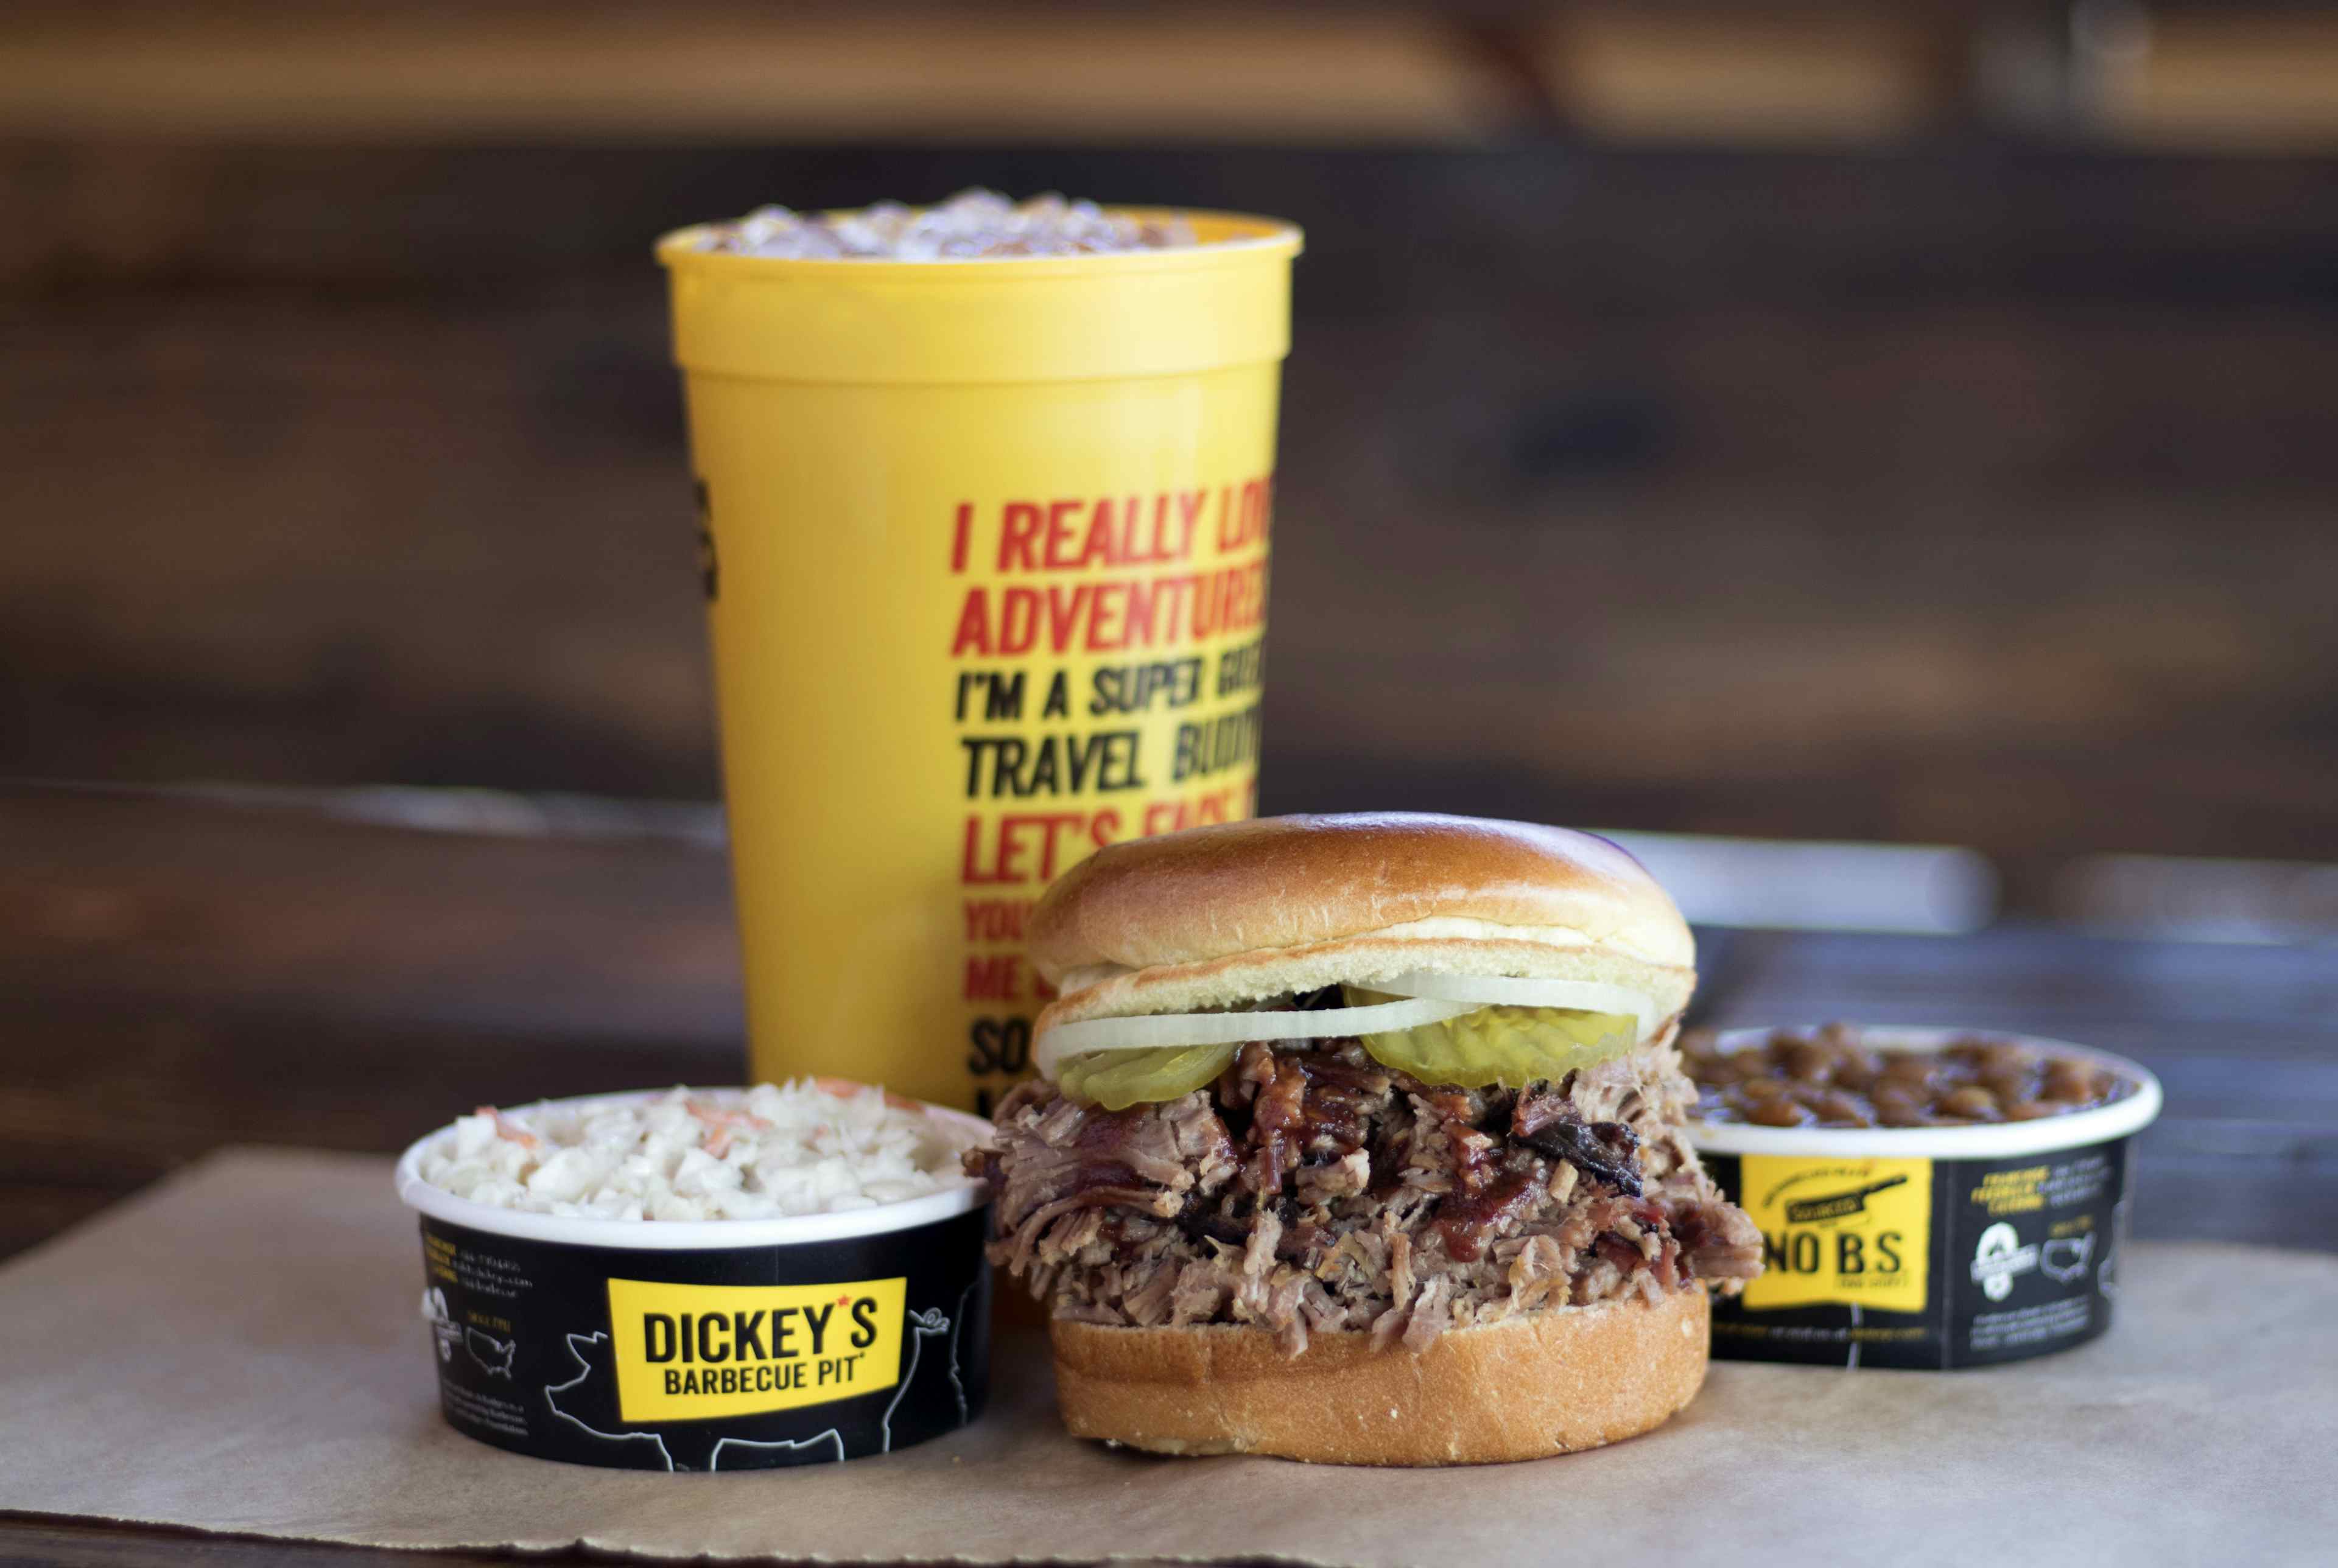  Dickey’s Barbecue Pit Brings Texas-style Barbecue to Napa, CA